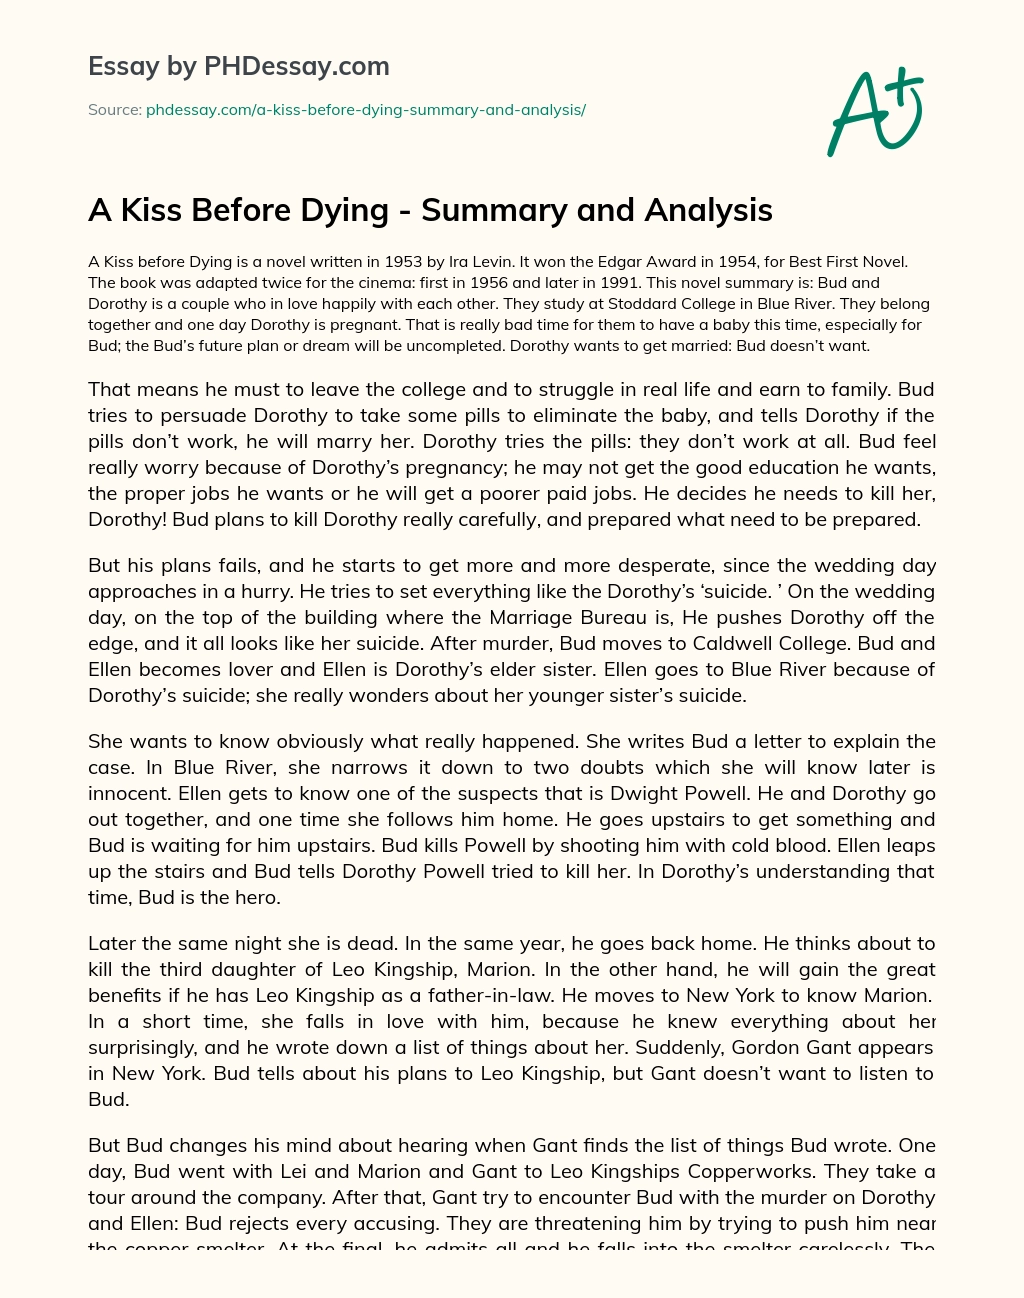 A Kiss Before Dying – Summary and Analysis essay